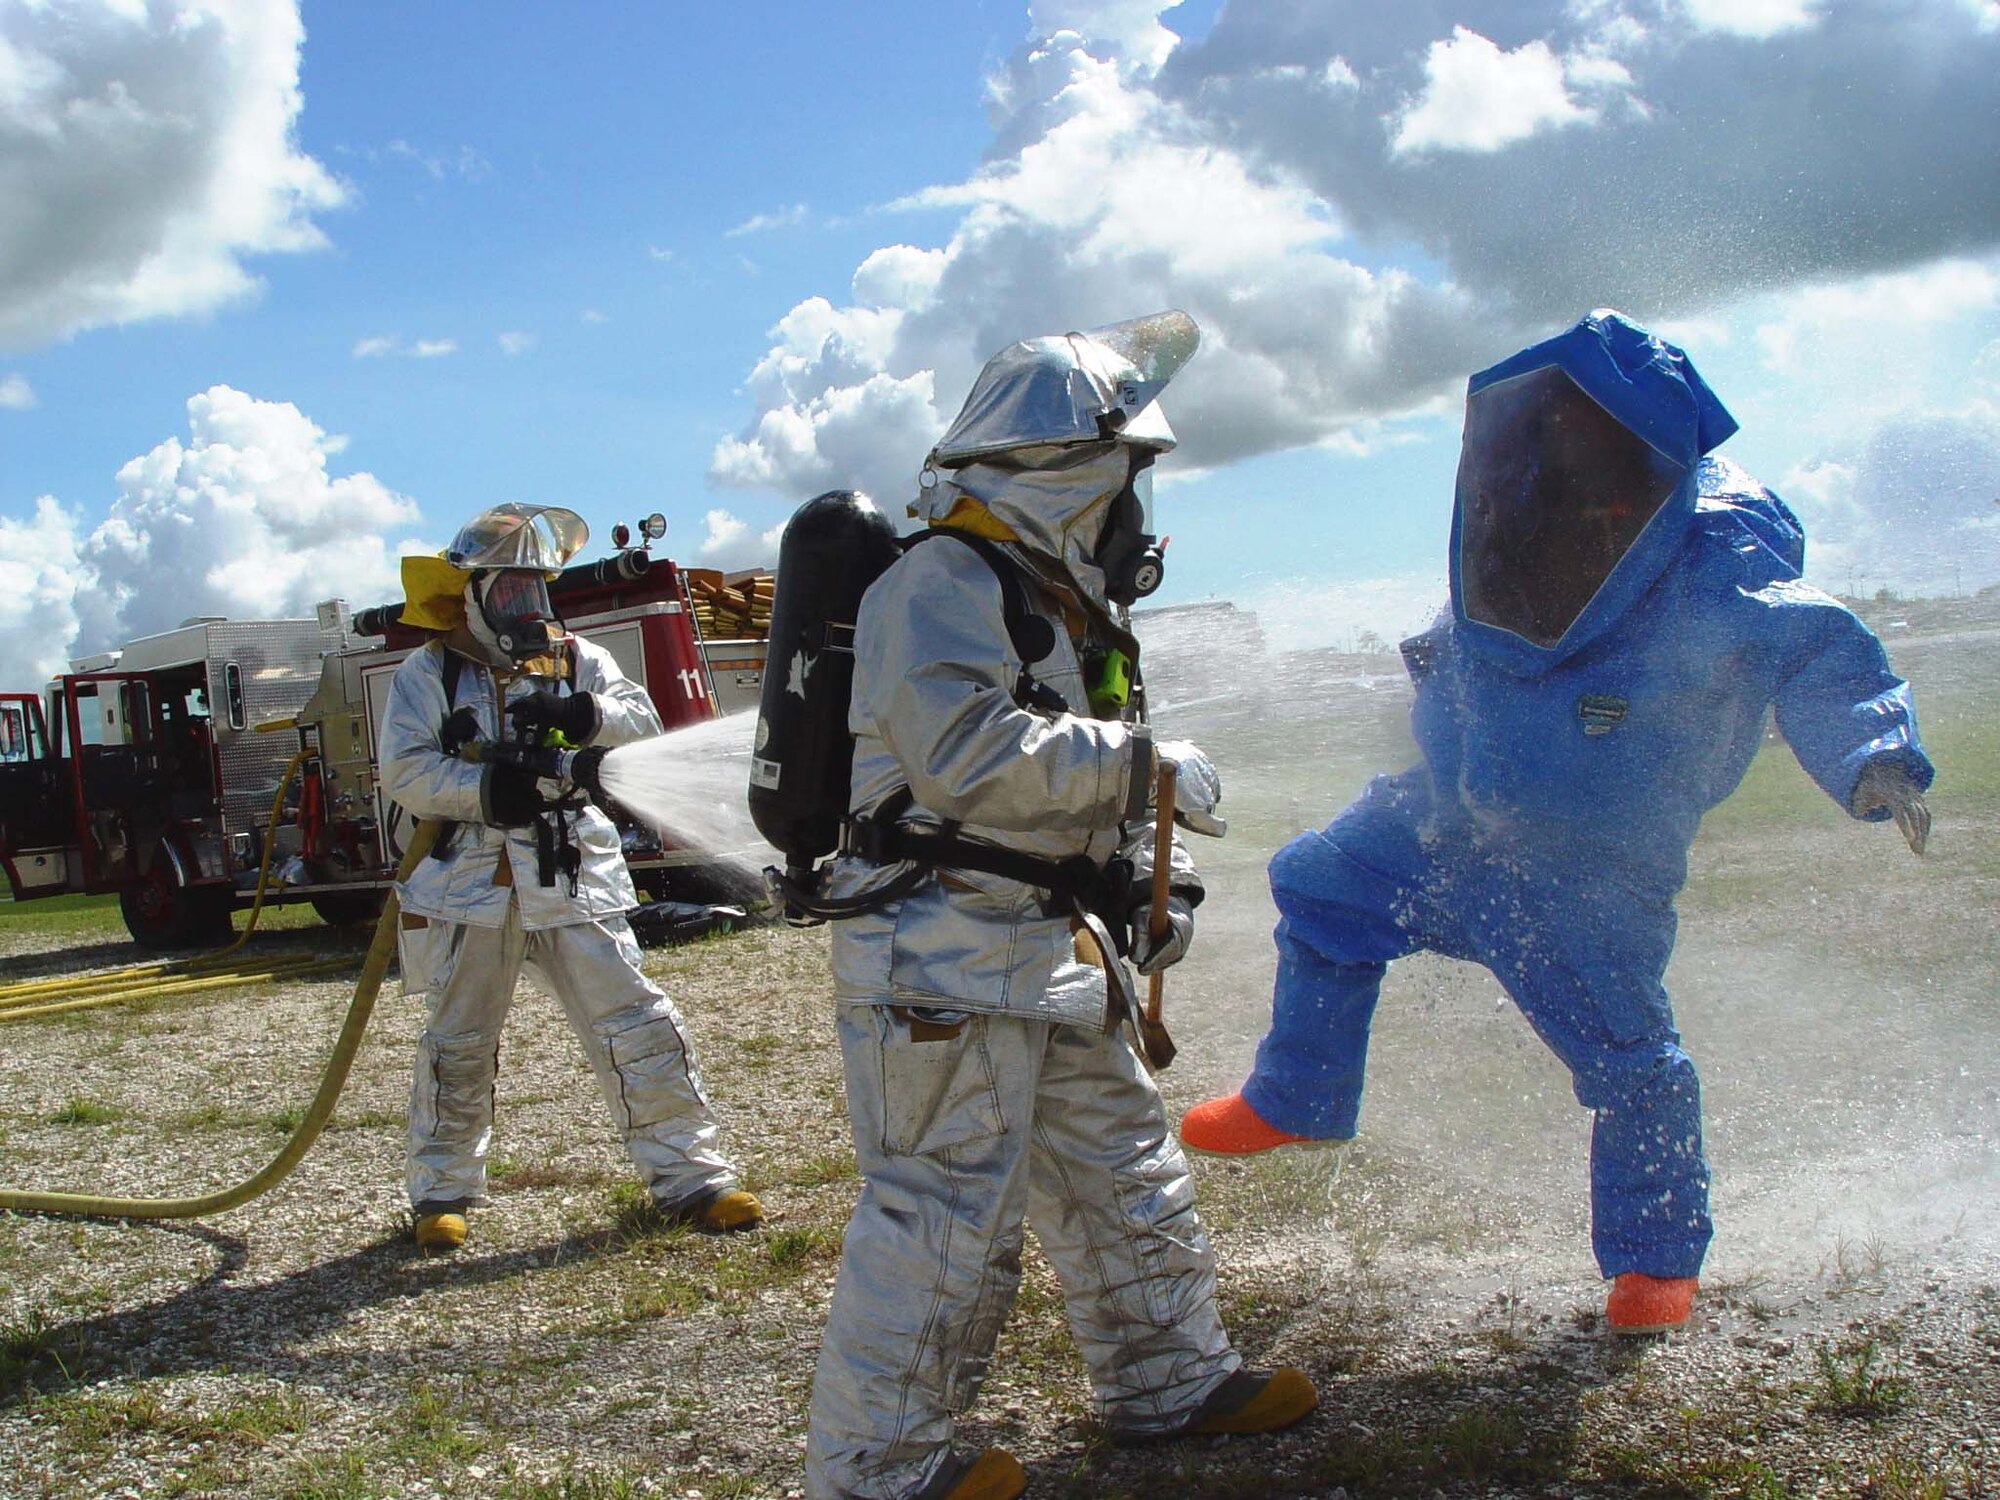 Firefighters from the 482nd Civil Engineering Squadron practice decontamination procedures during hazardous materials training at Homestead Air Reserve Base, Fla. on June 9. Members of the base fire department train several times a year while wearing chemical and biological protective suits.  (US Air Force photo by Lisa Macias)